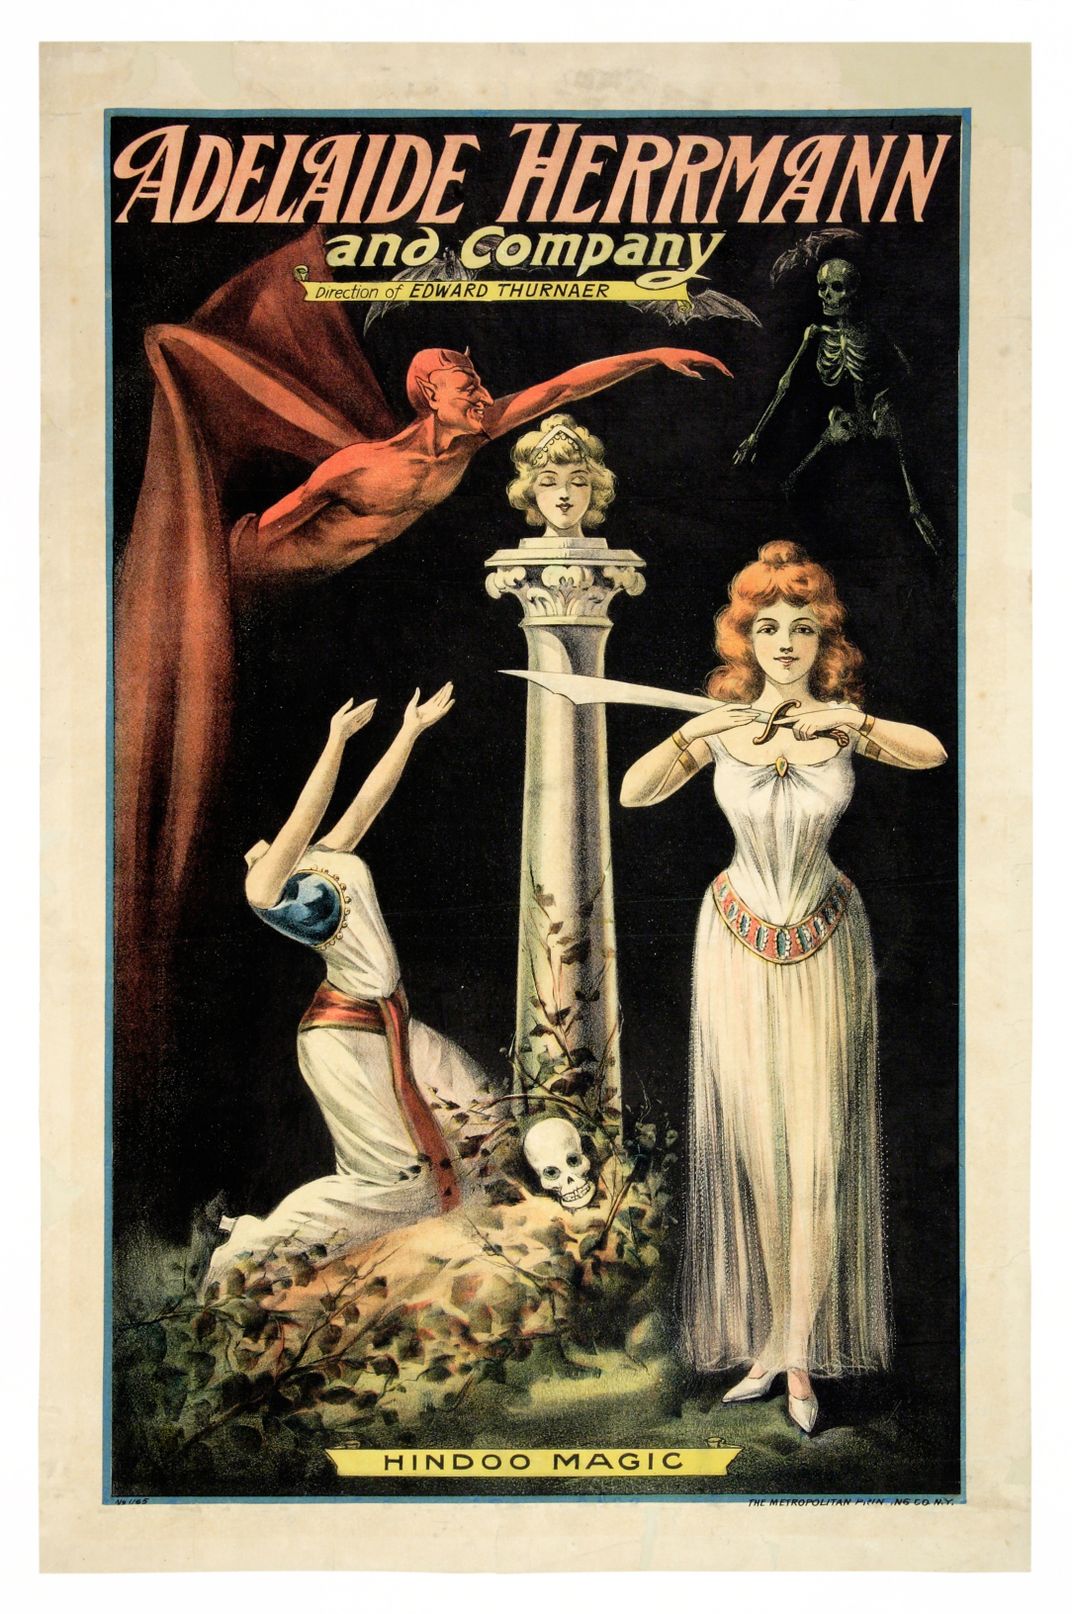 The Amazing Poster Art From the 'Golden Age' of Magic